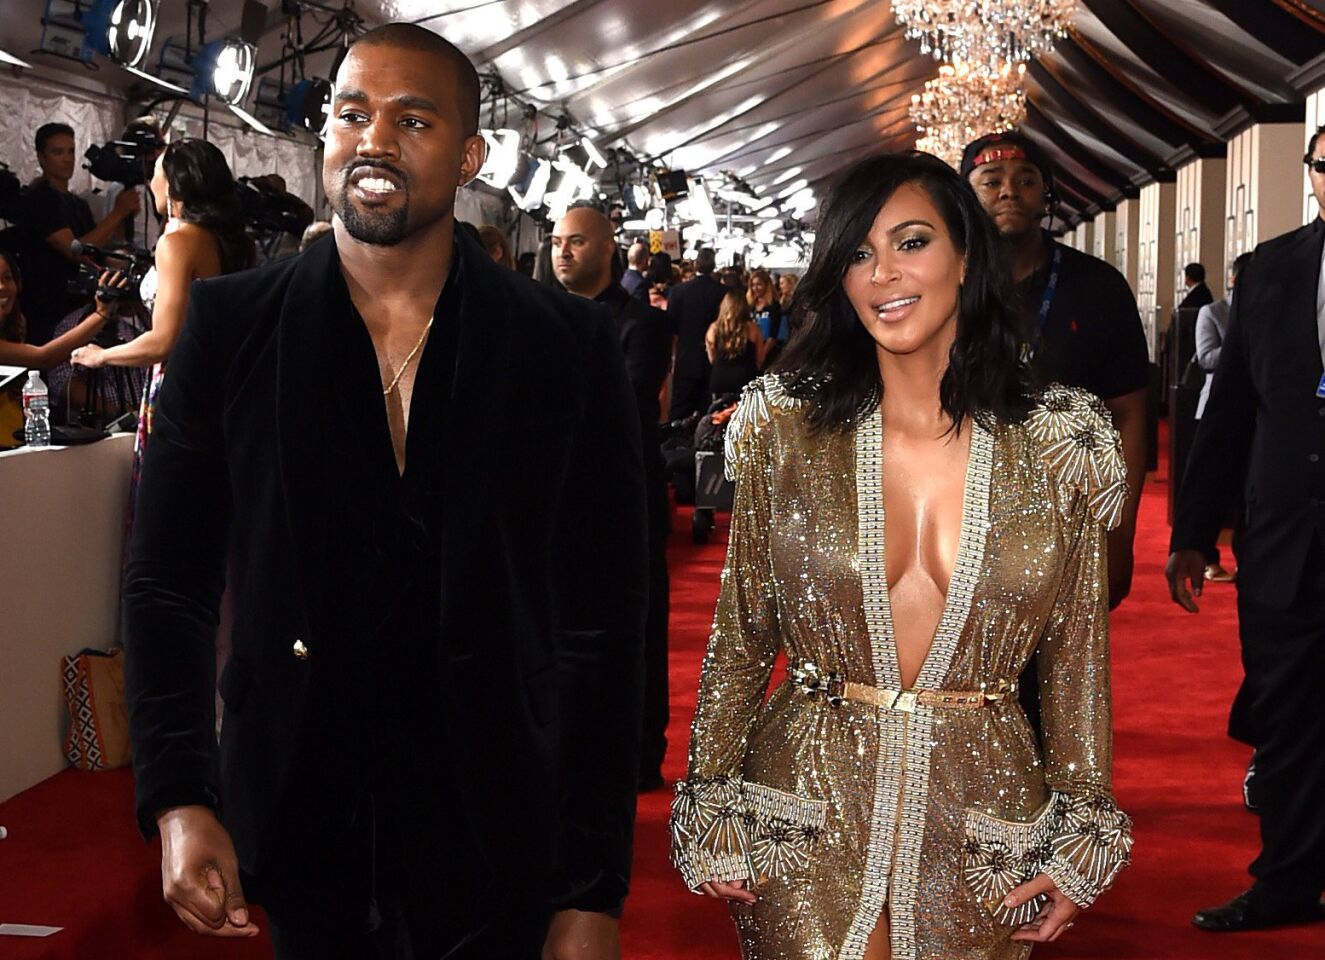 Kanye West, who attended with Kim Kardashian, was interviewed by Ryan Seacrest on the Grammys red carpet before the show. Referencing West's varied projects, the host said, "Attention deficit disorder is a good thing." Kanye's reply? "It's also called ... thinking."